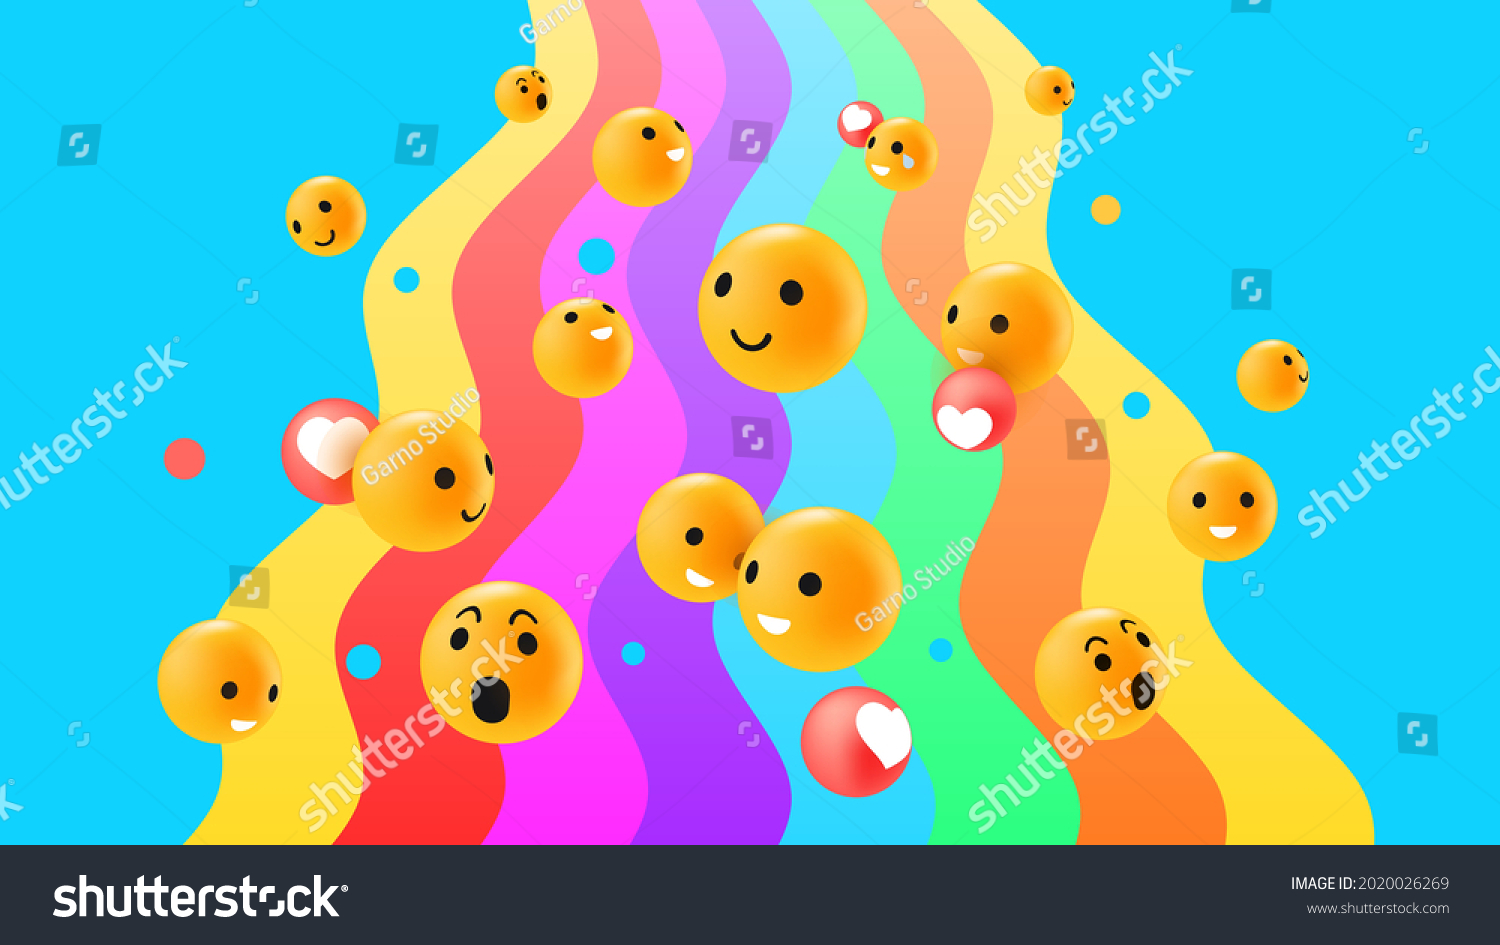 SVG of Diverse 3D Emotion Faces Reactions on Bright Rainbow Background. Vector illustration svg